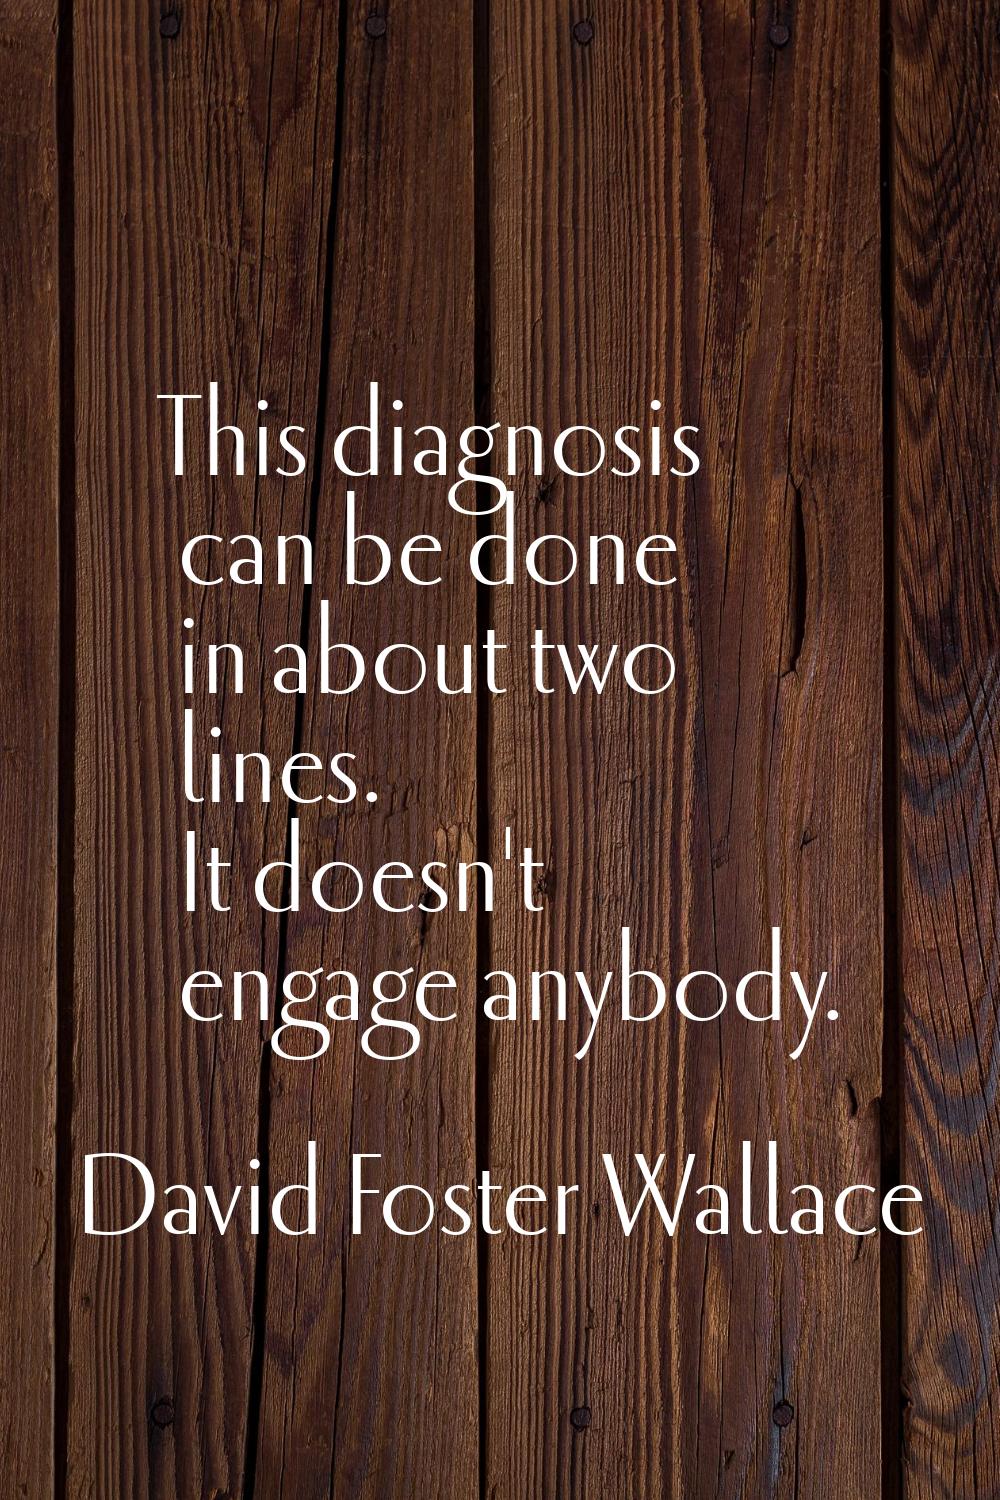 This diagnosis can be done in about two lines. It doesn't engage anybody.